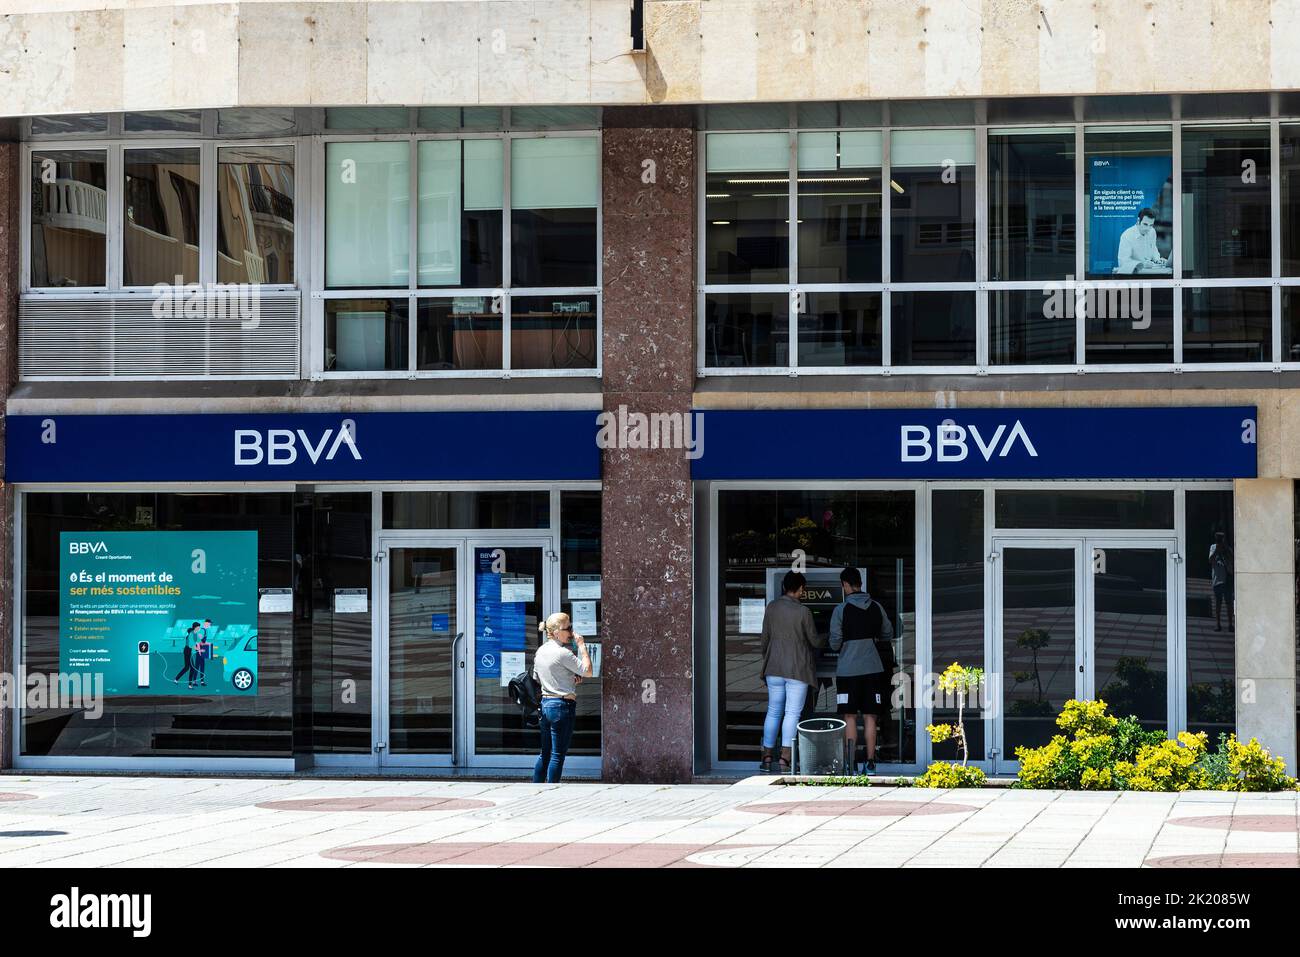 Tortosa, Spain - May 13, 2022: Facade and logo of the Banco Bilbao Vizcaya Argentaria or BBVA with people at the ATM in Tortosa, Catalonia, Spain Stock Photo